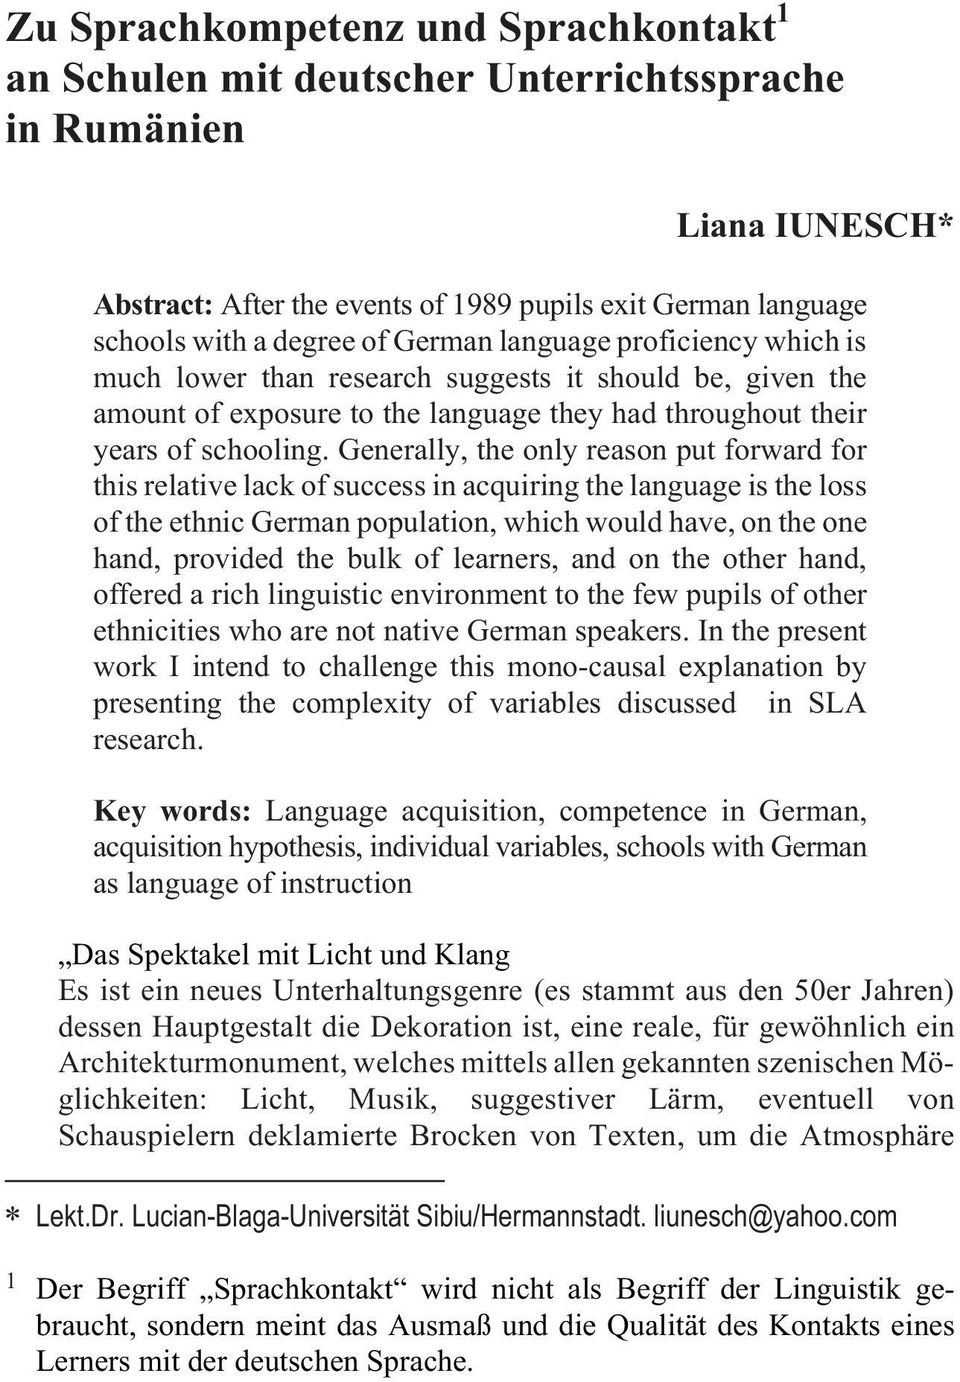 Generally, the only reason put forward for this relative lack of success in acquiring the language is the loss of the ethnic German population, which would have, on the one hand, provided the bulk of